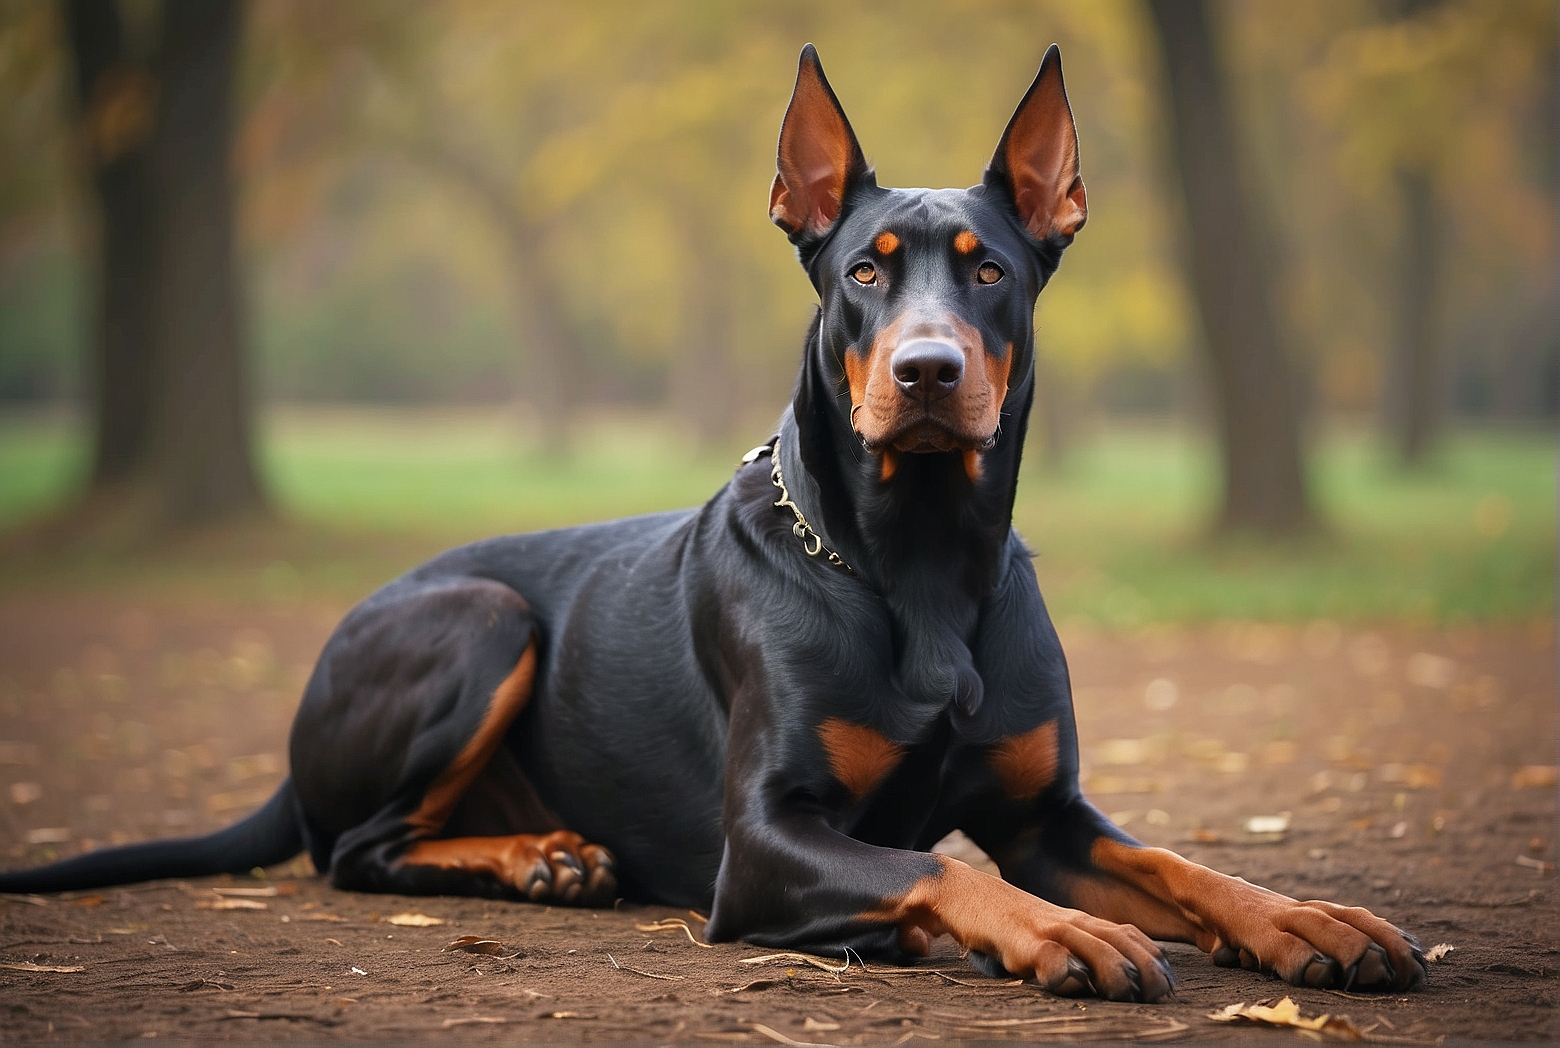 What are the different doberman breeds?